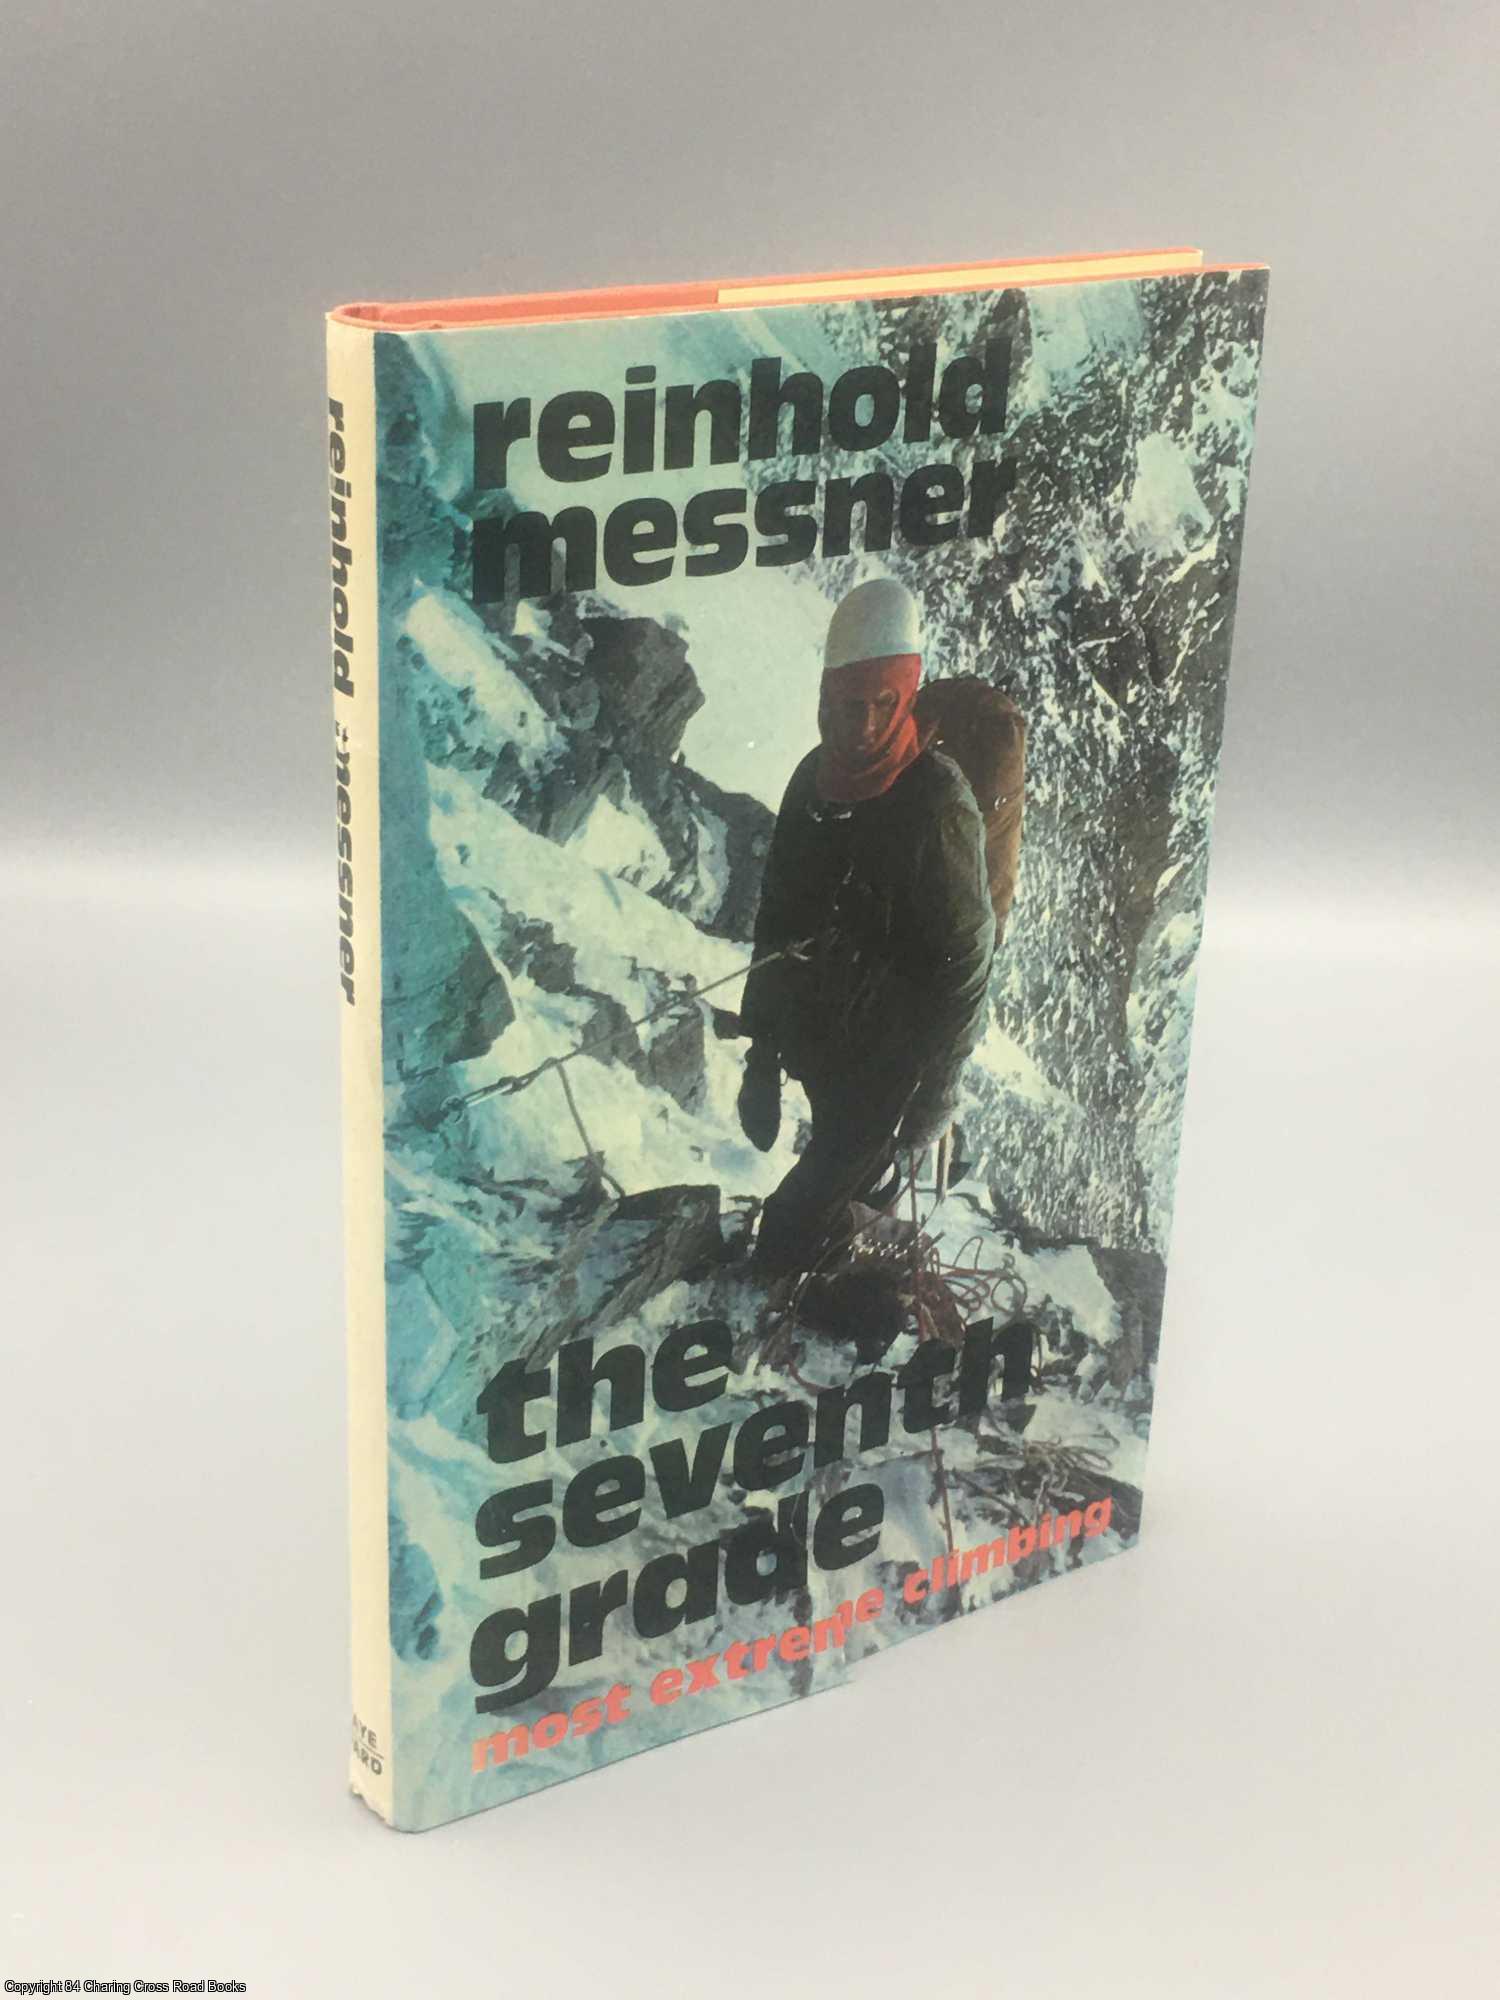 Messner, Reinhold - The Seventh Grade: most extreme climbing